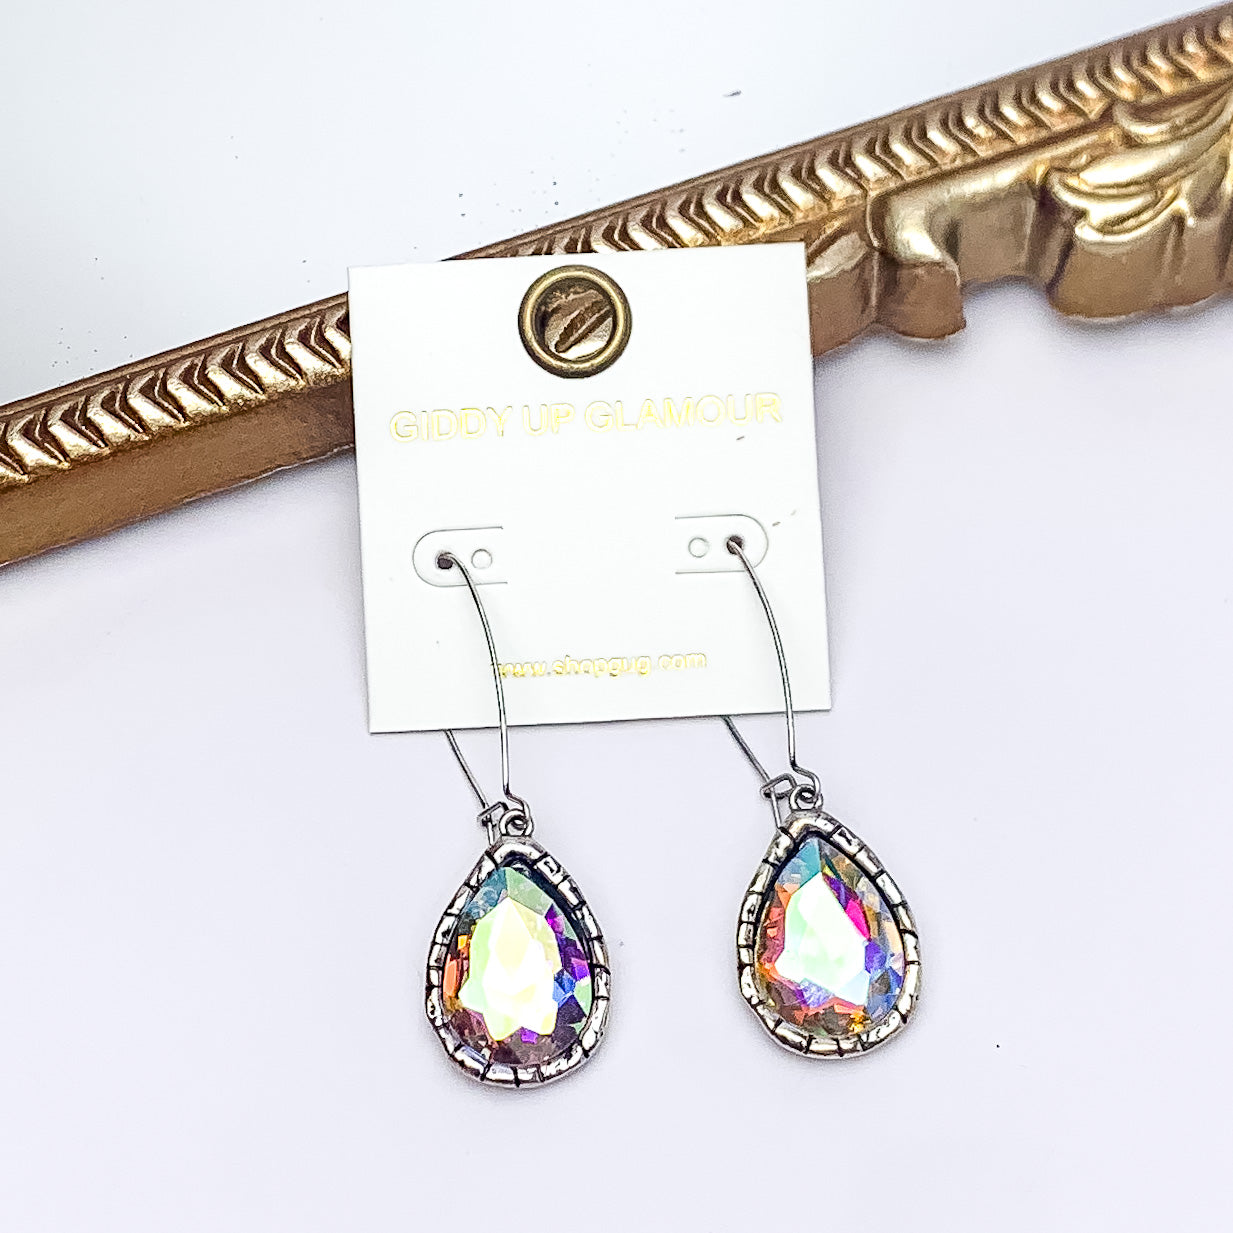 Radiant Kidney Wire Teardrop Earrings With AB Crystals in Silver Tone. Pictured on a white background with a gold frame in the background.